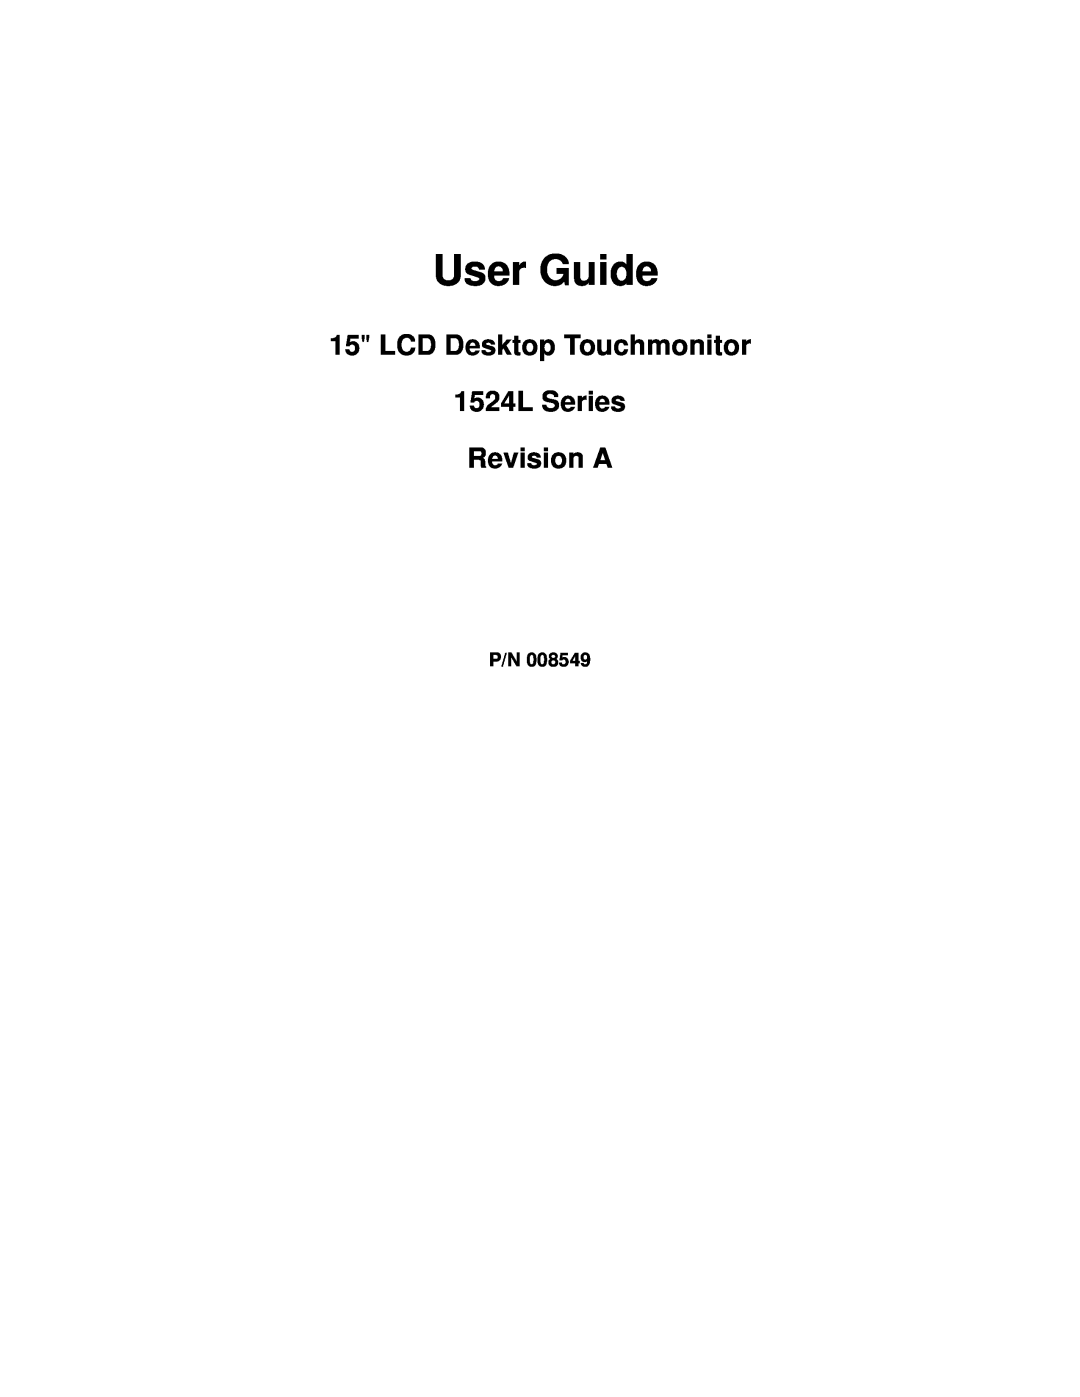 Elo TouchSystems manual User Guide, LCD Desktop Touchmonitor 1524L Series Revision A 